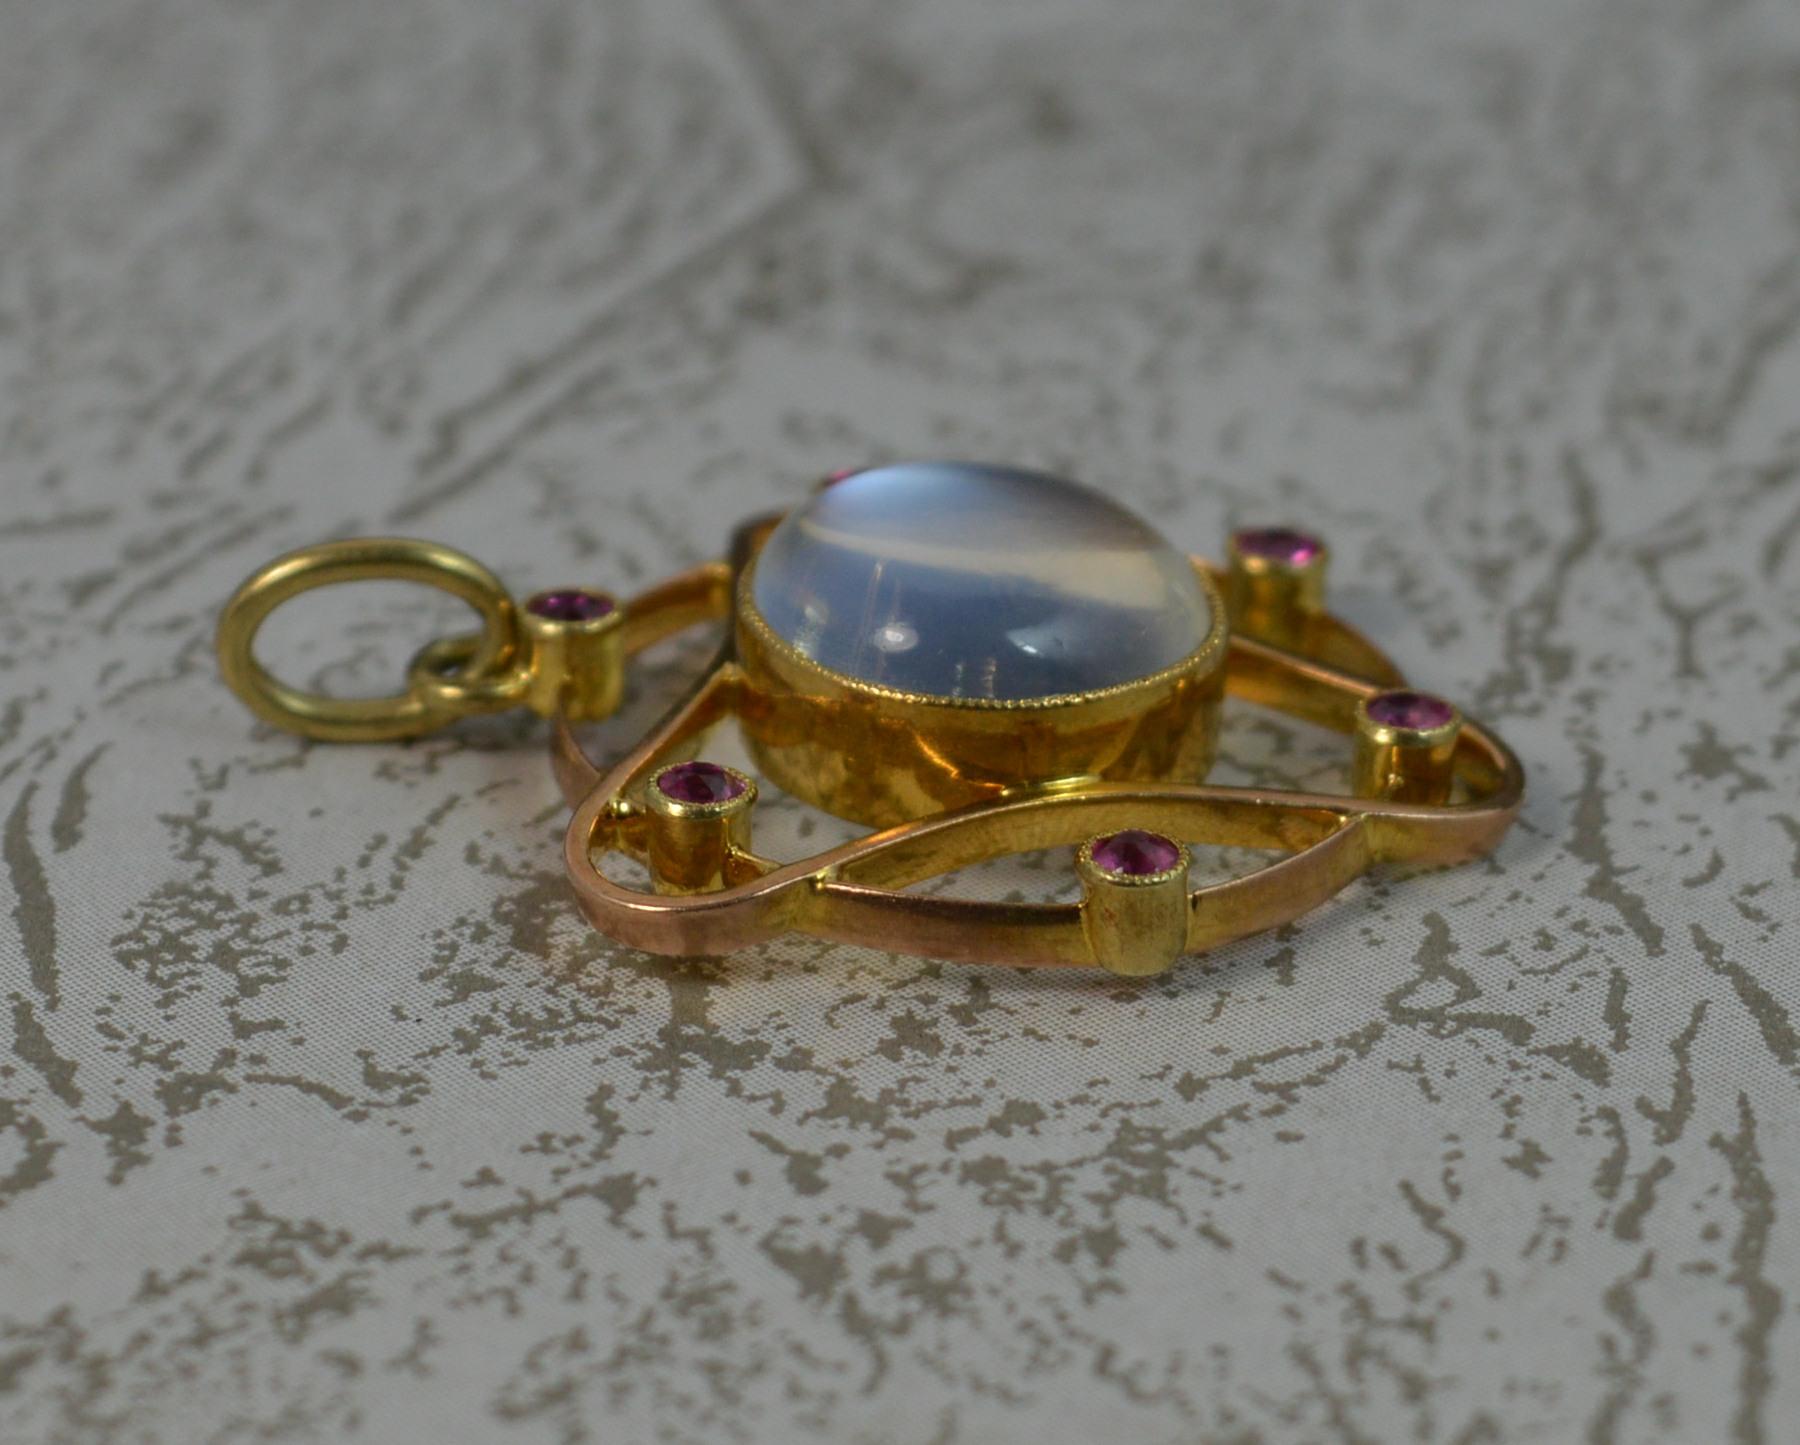 A fantastic Art Nouveau period pendant by Murrle Bennett and Co c1905.
Solid 15 carat gold example.
Designed with a bright round moonstone to centre in bezel setting. Surrounding is a gold flowing shape and set with six small round cut